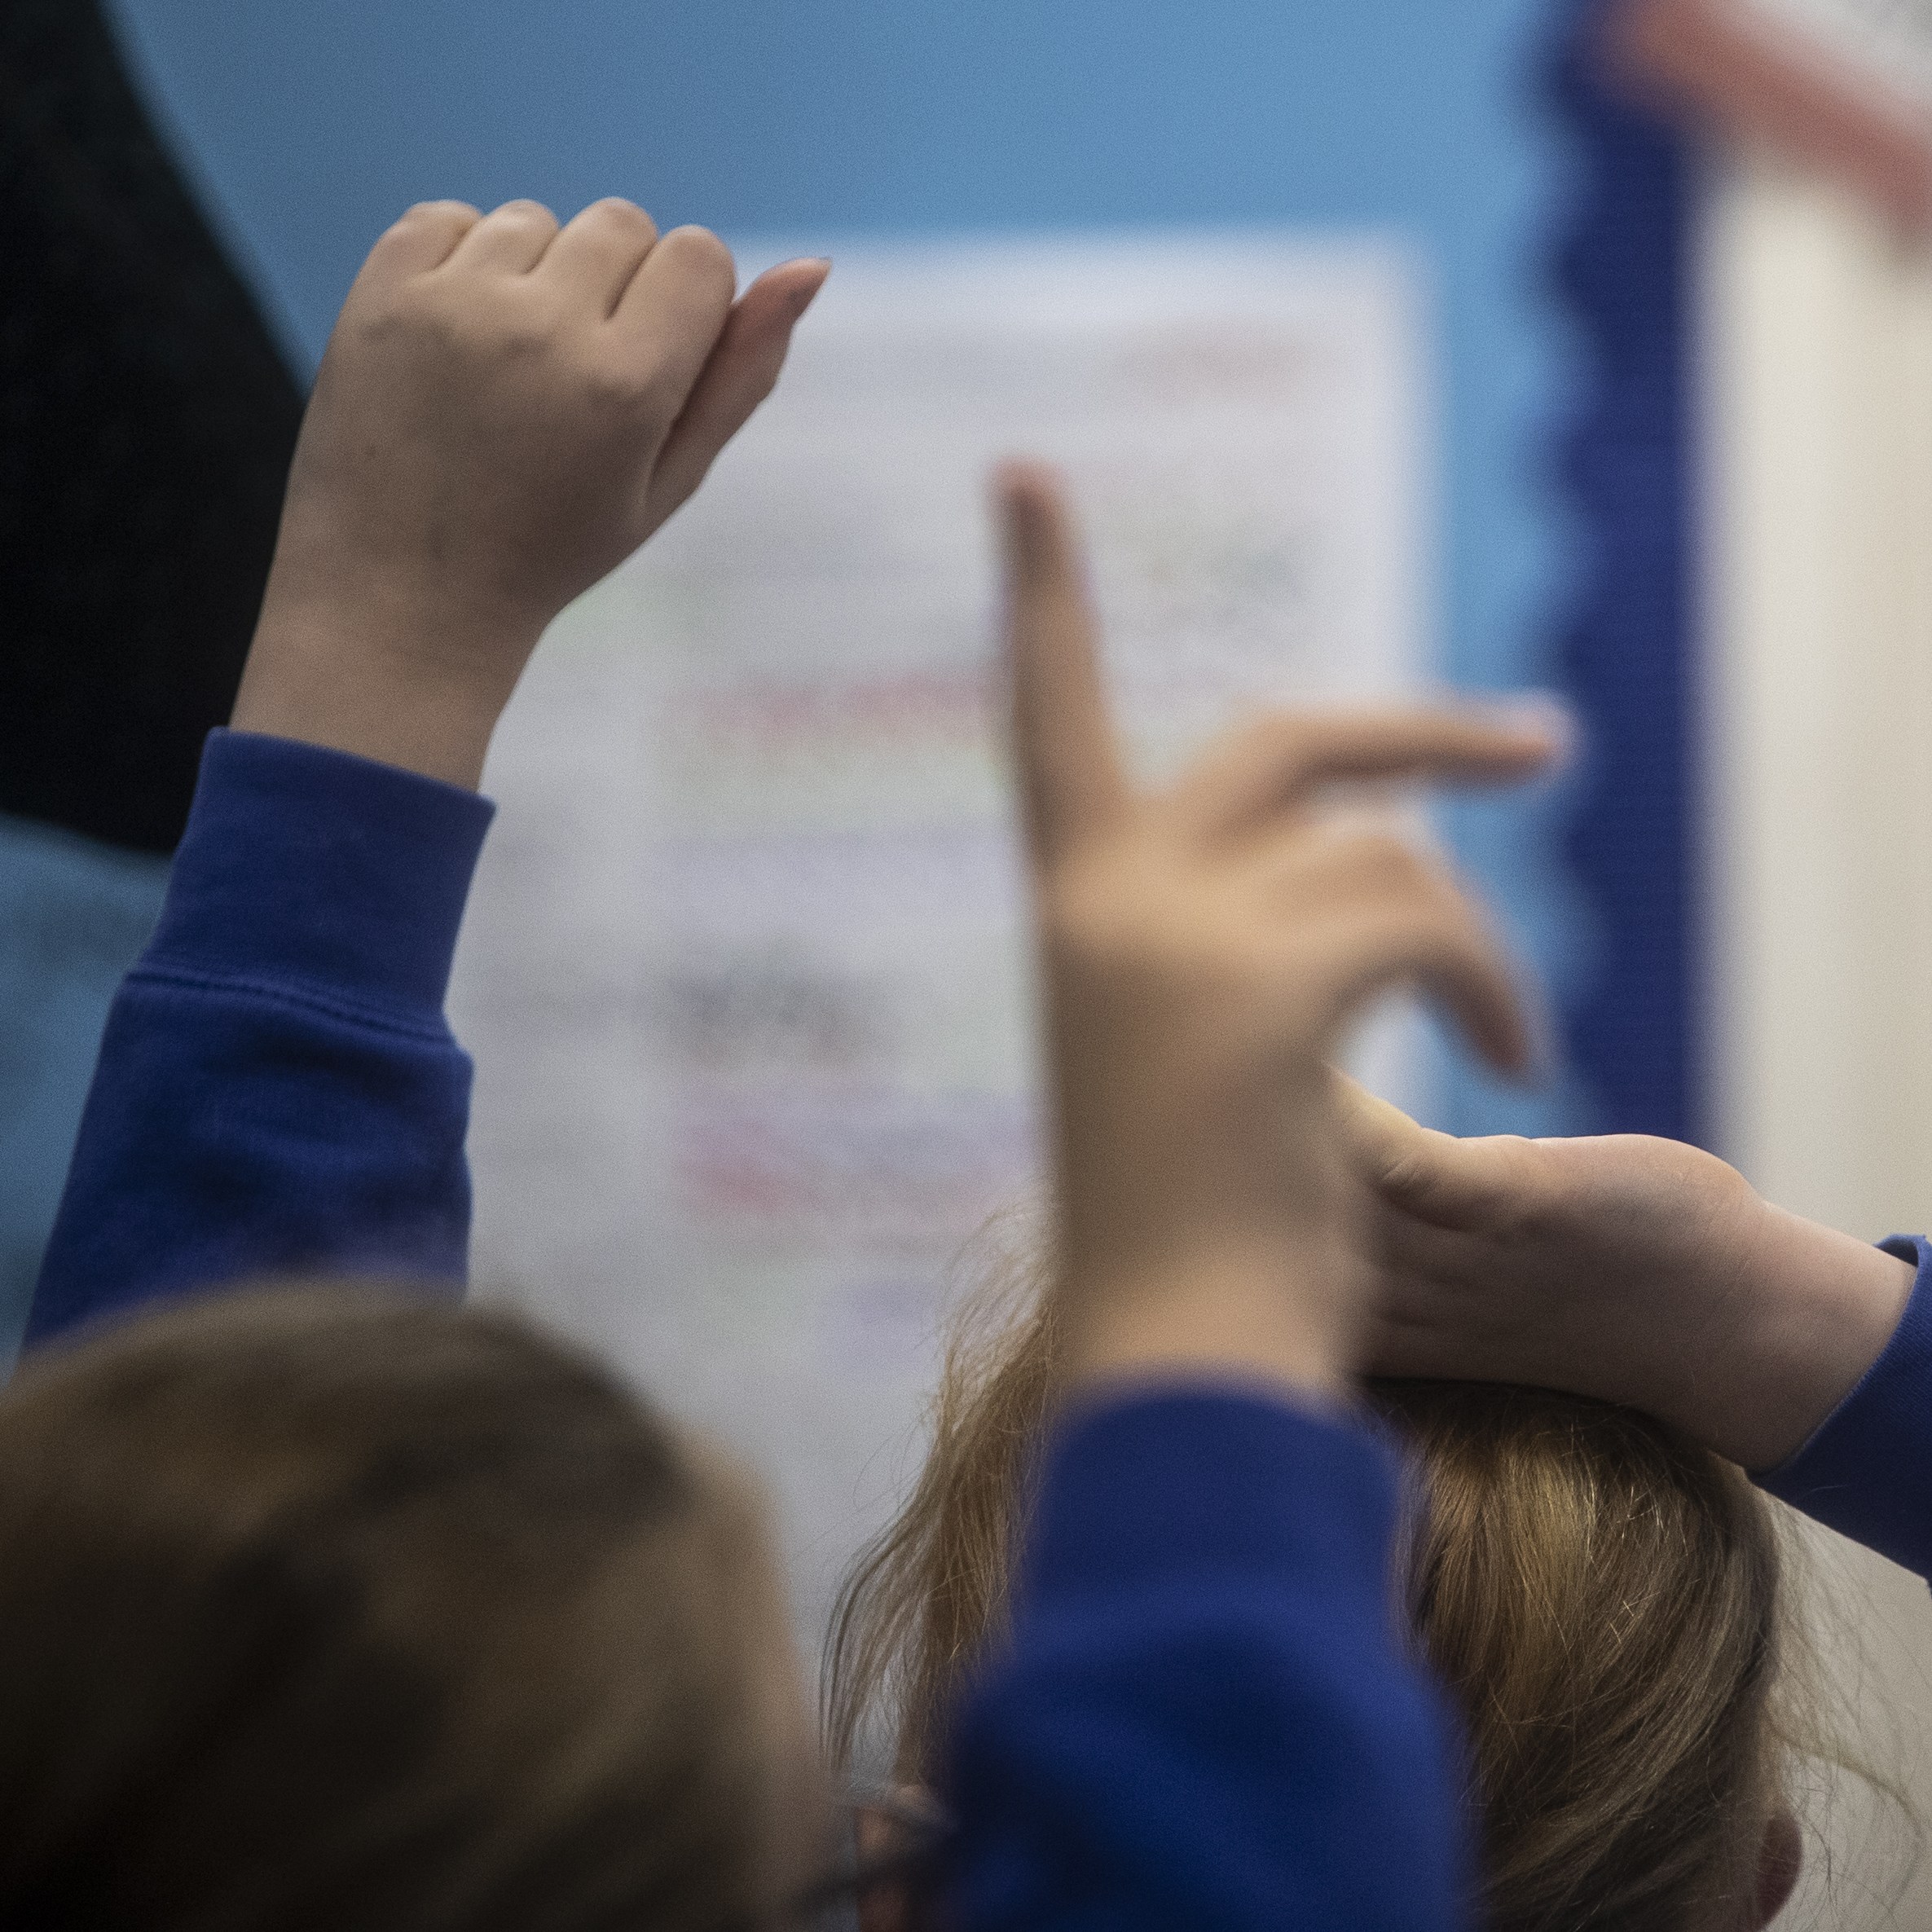 The Conservative-led Moray council has confirmed it will introduce the new guidelines for schools in northeast Scotland